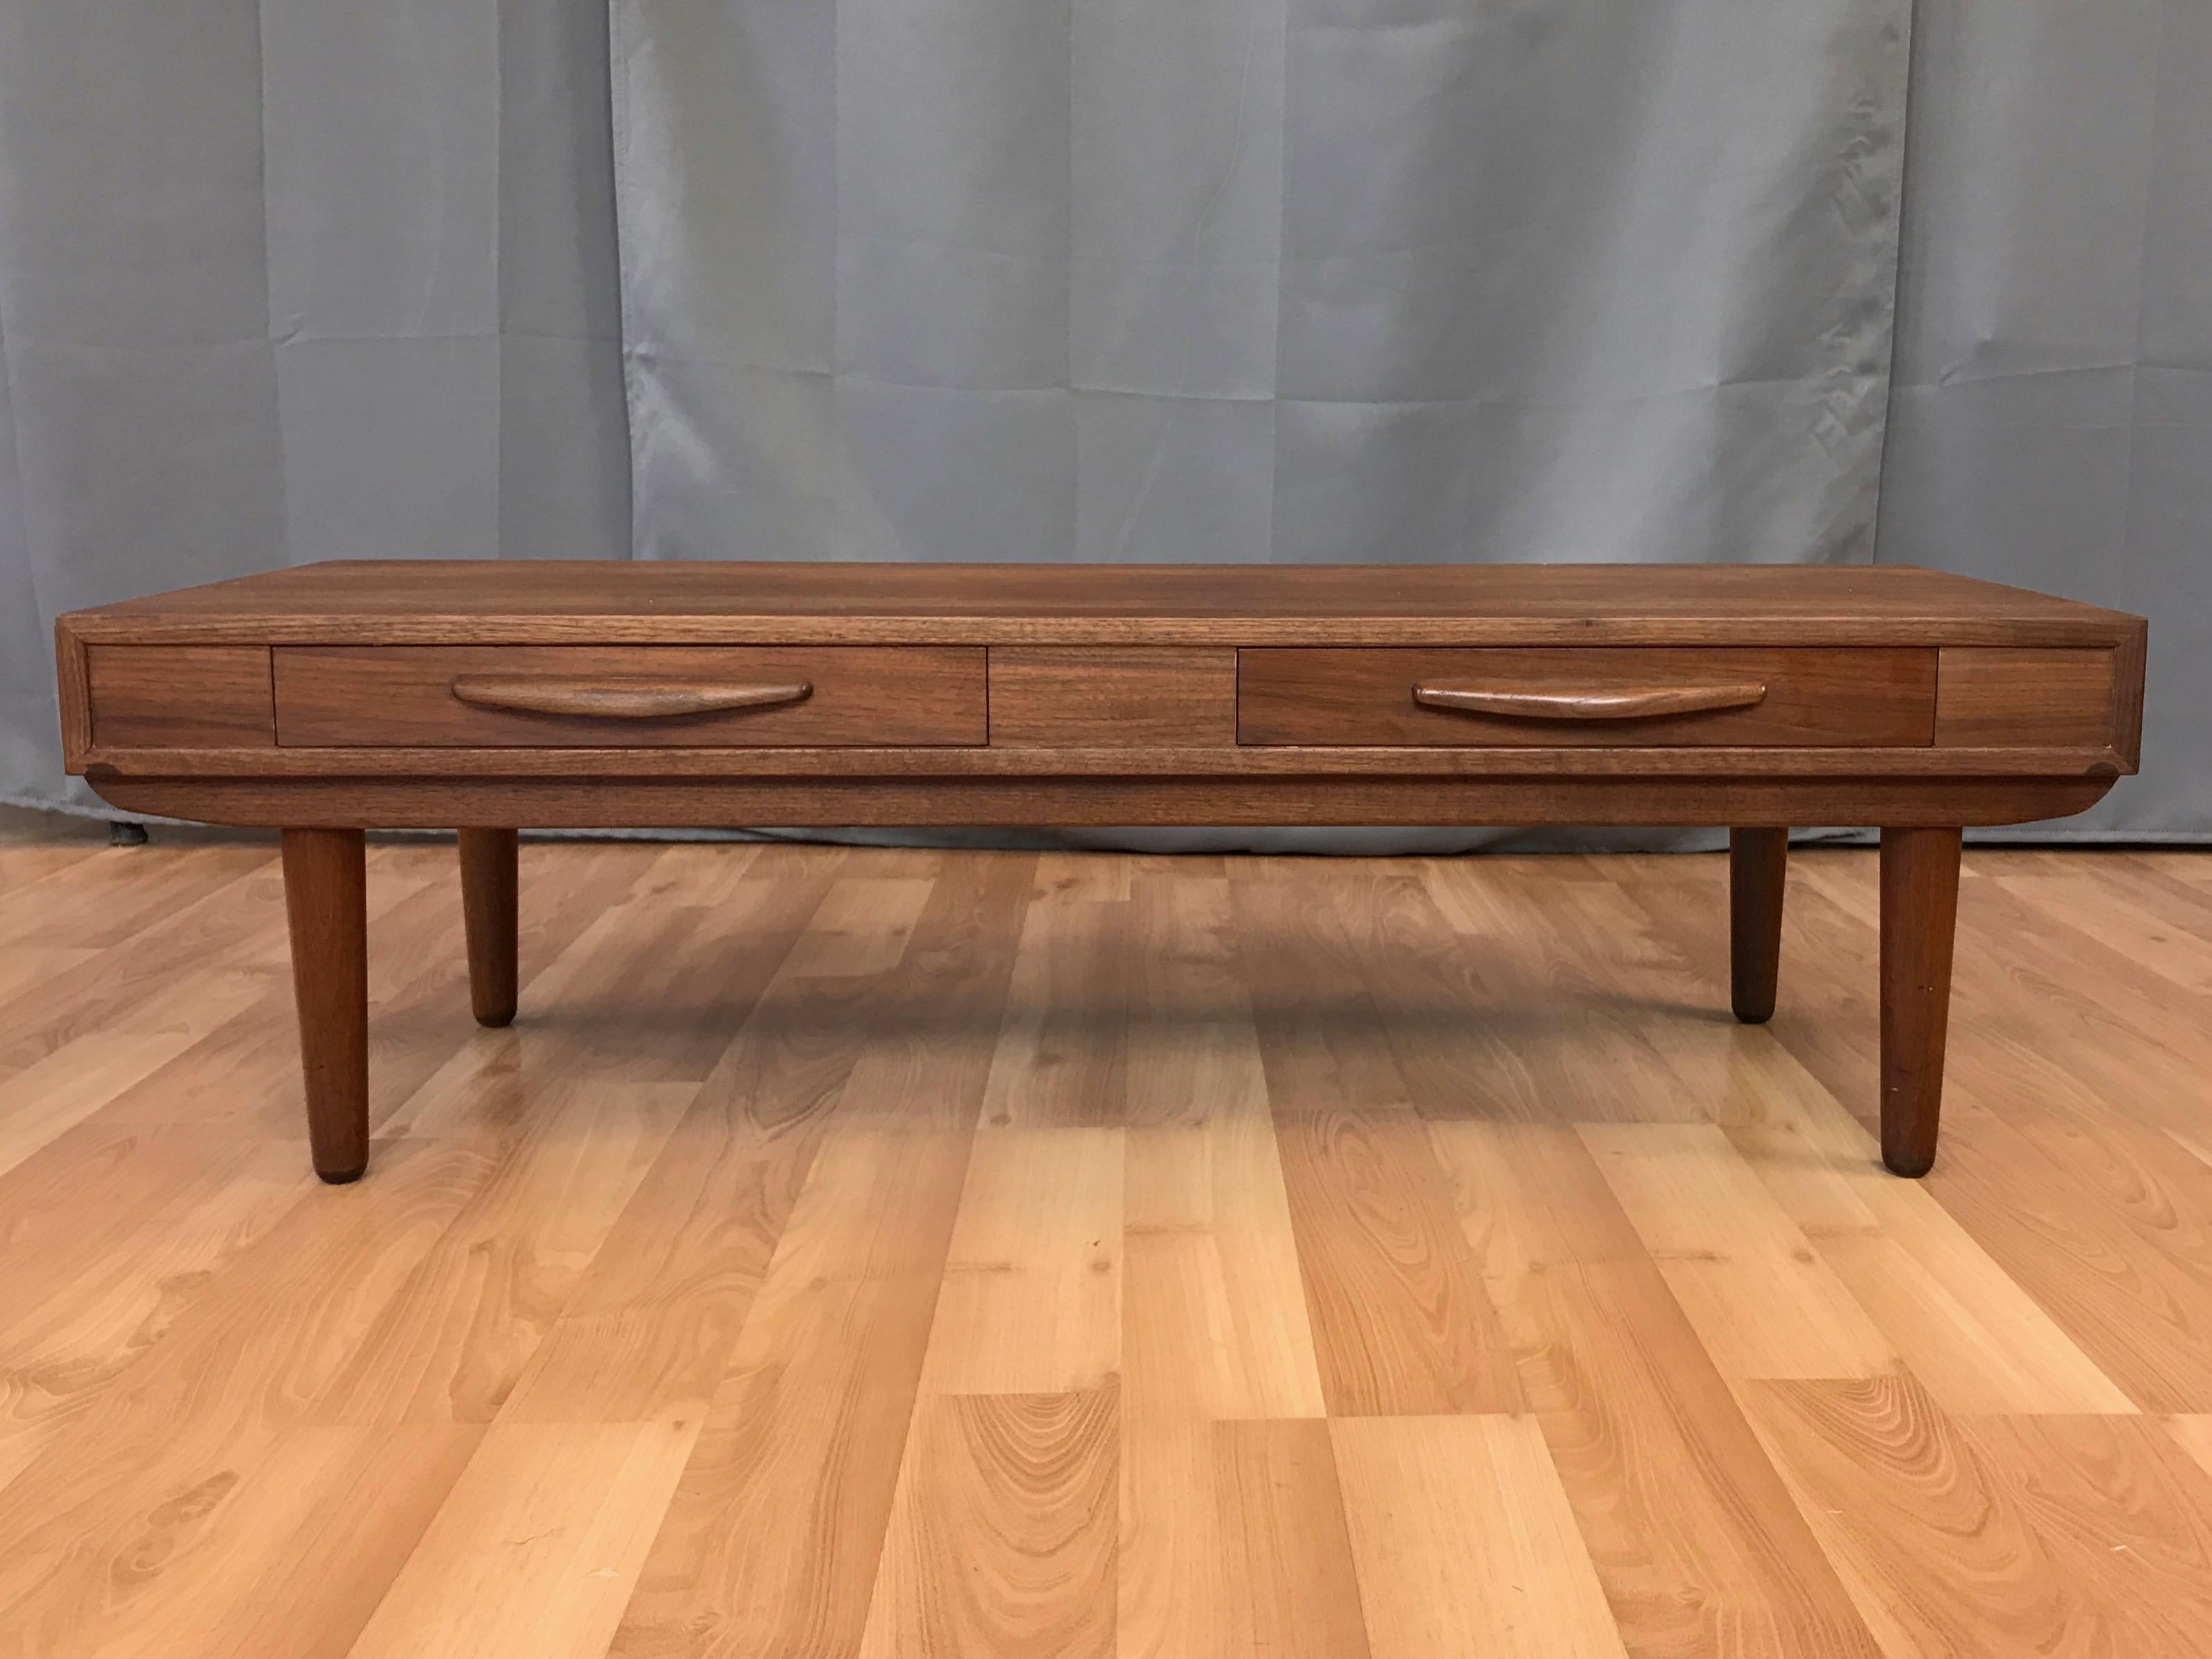 A vintage Mid-Century Modern low walnut coffee table with drawers.

Clean lines, timeless design, and handsomely figured bookmatched walnut remind of us of certain pieces by Robert Baron and Richard Thompson for Glenn of California. Features a